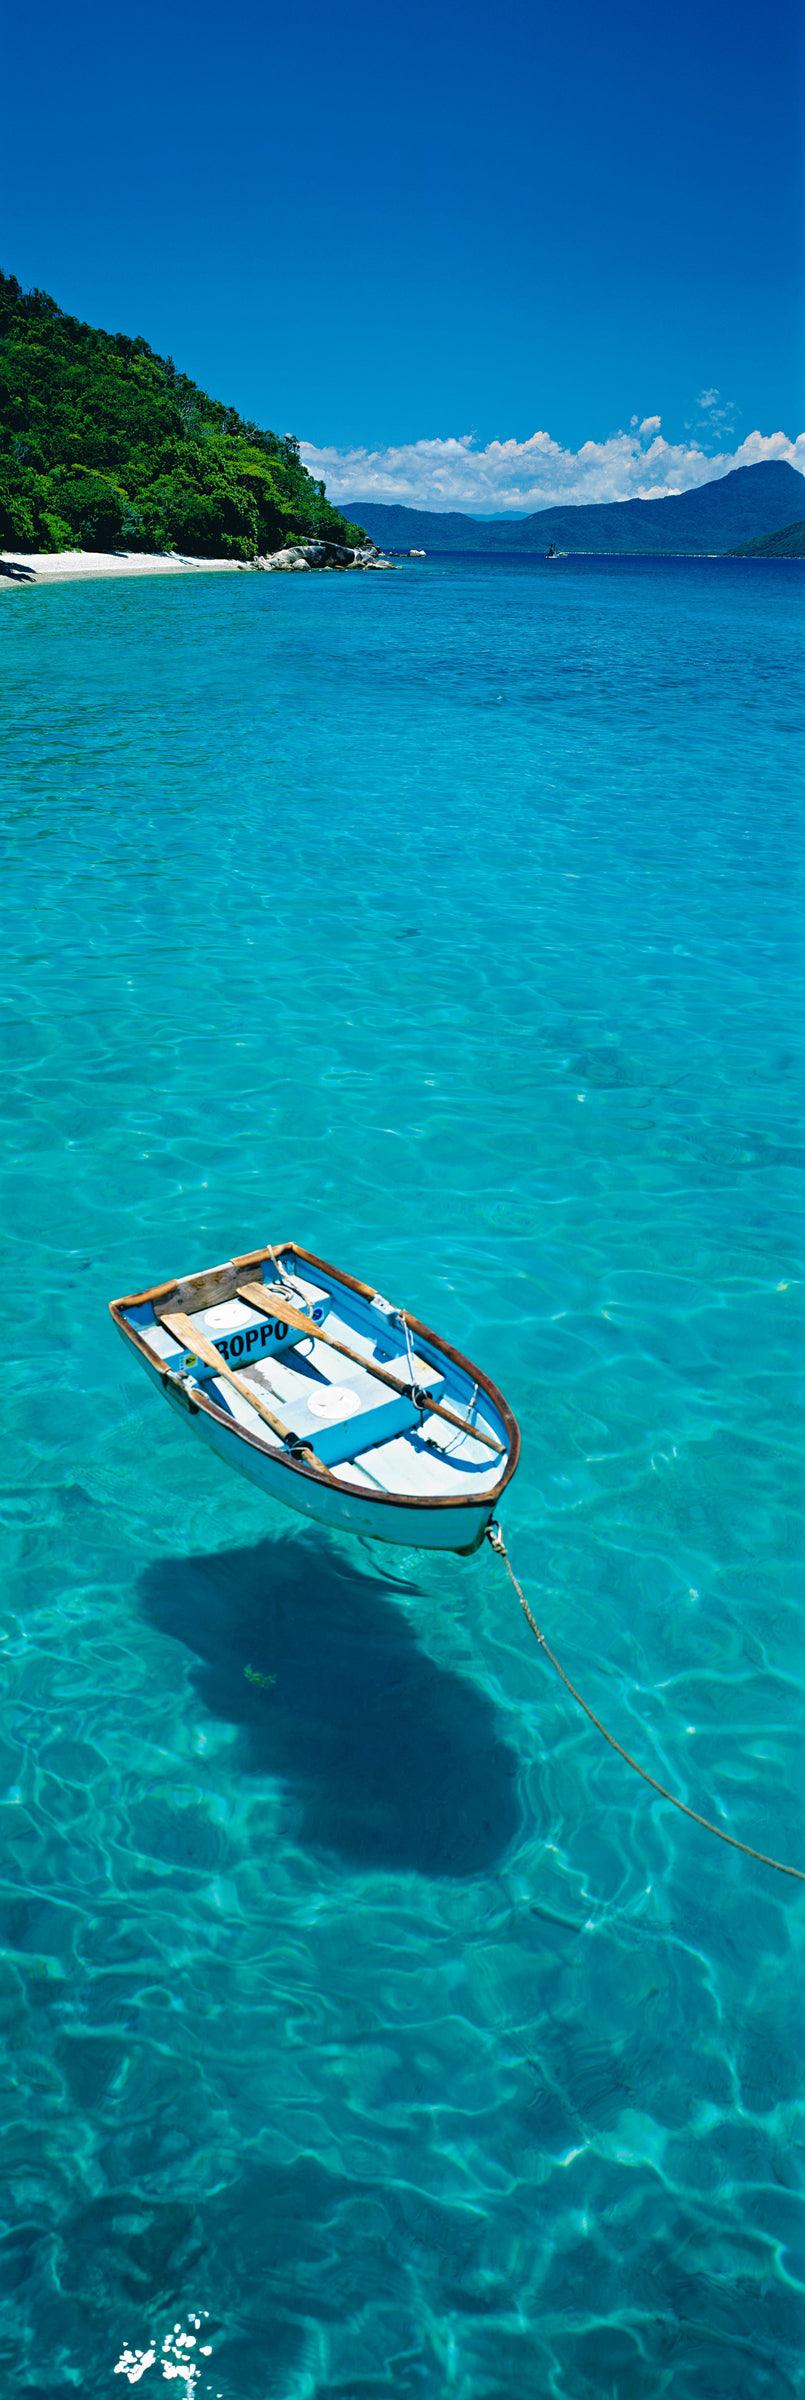 Rowboat floating on the turquoise waters in front of the tree filled Fitzroy Island Australia